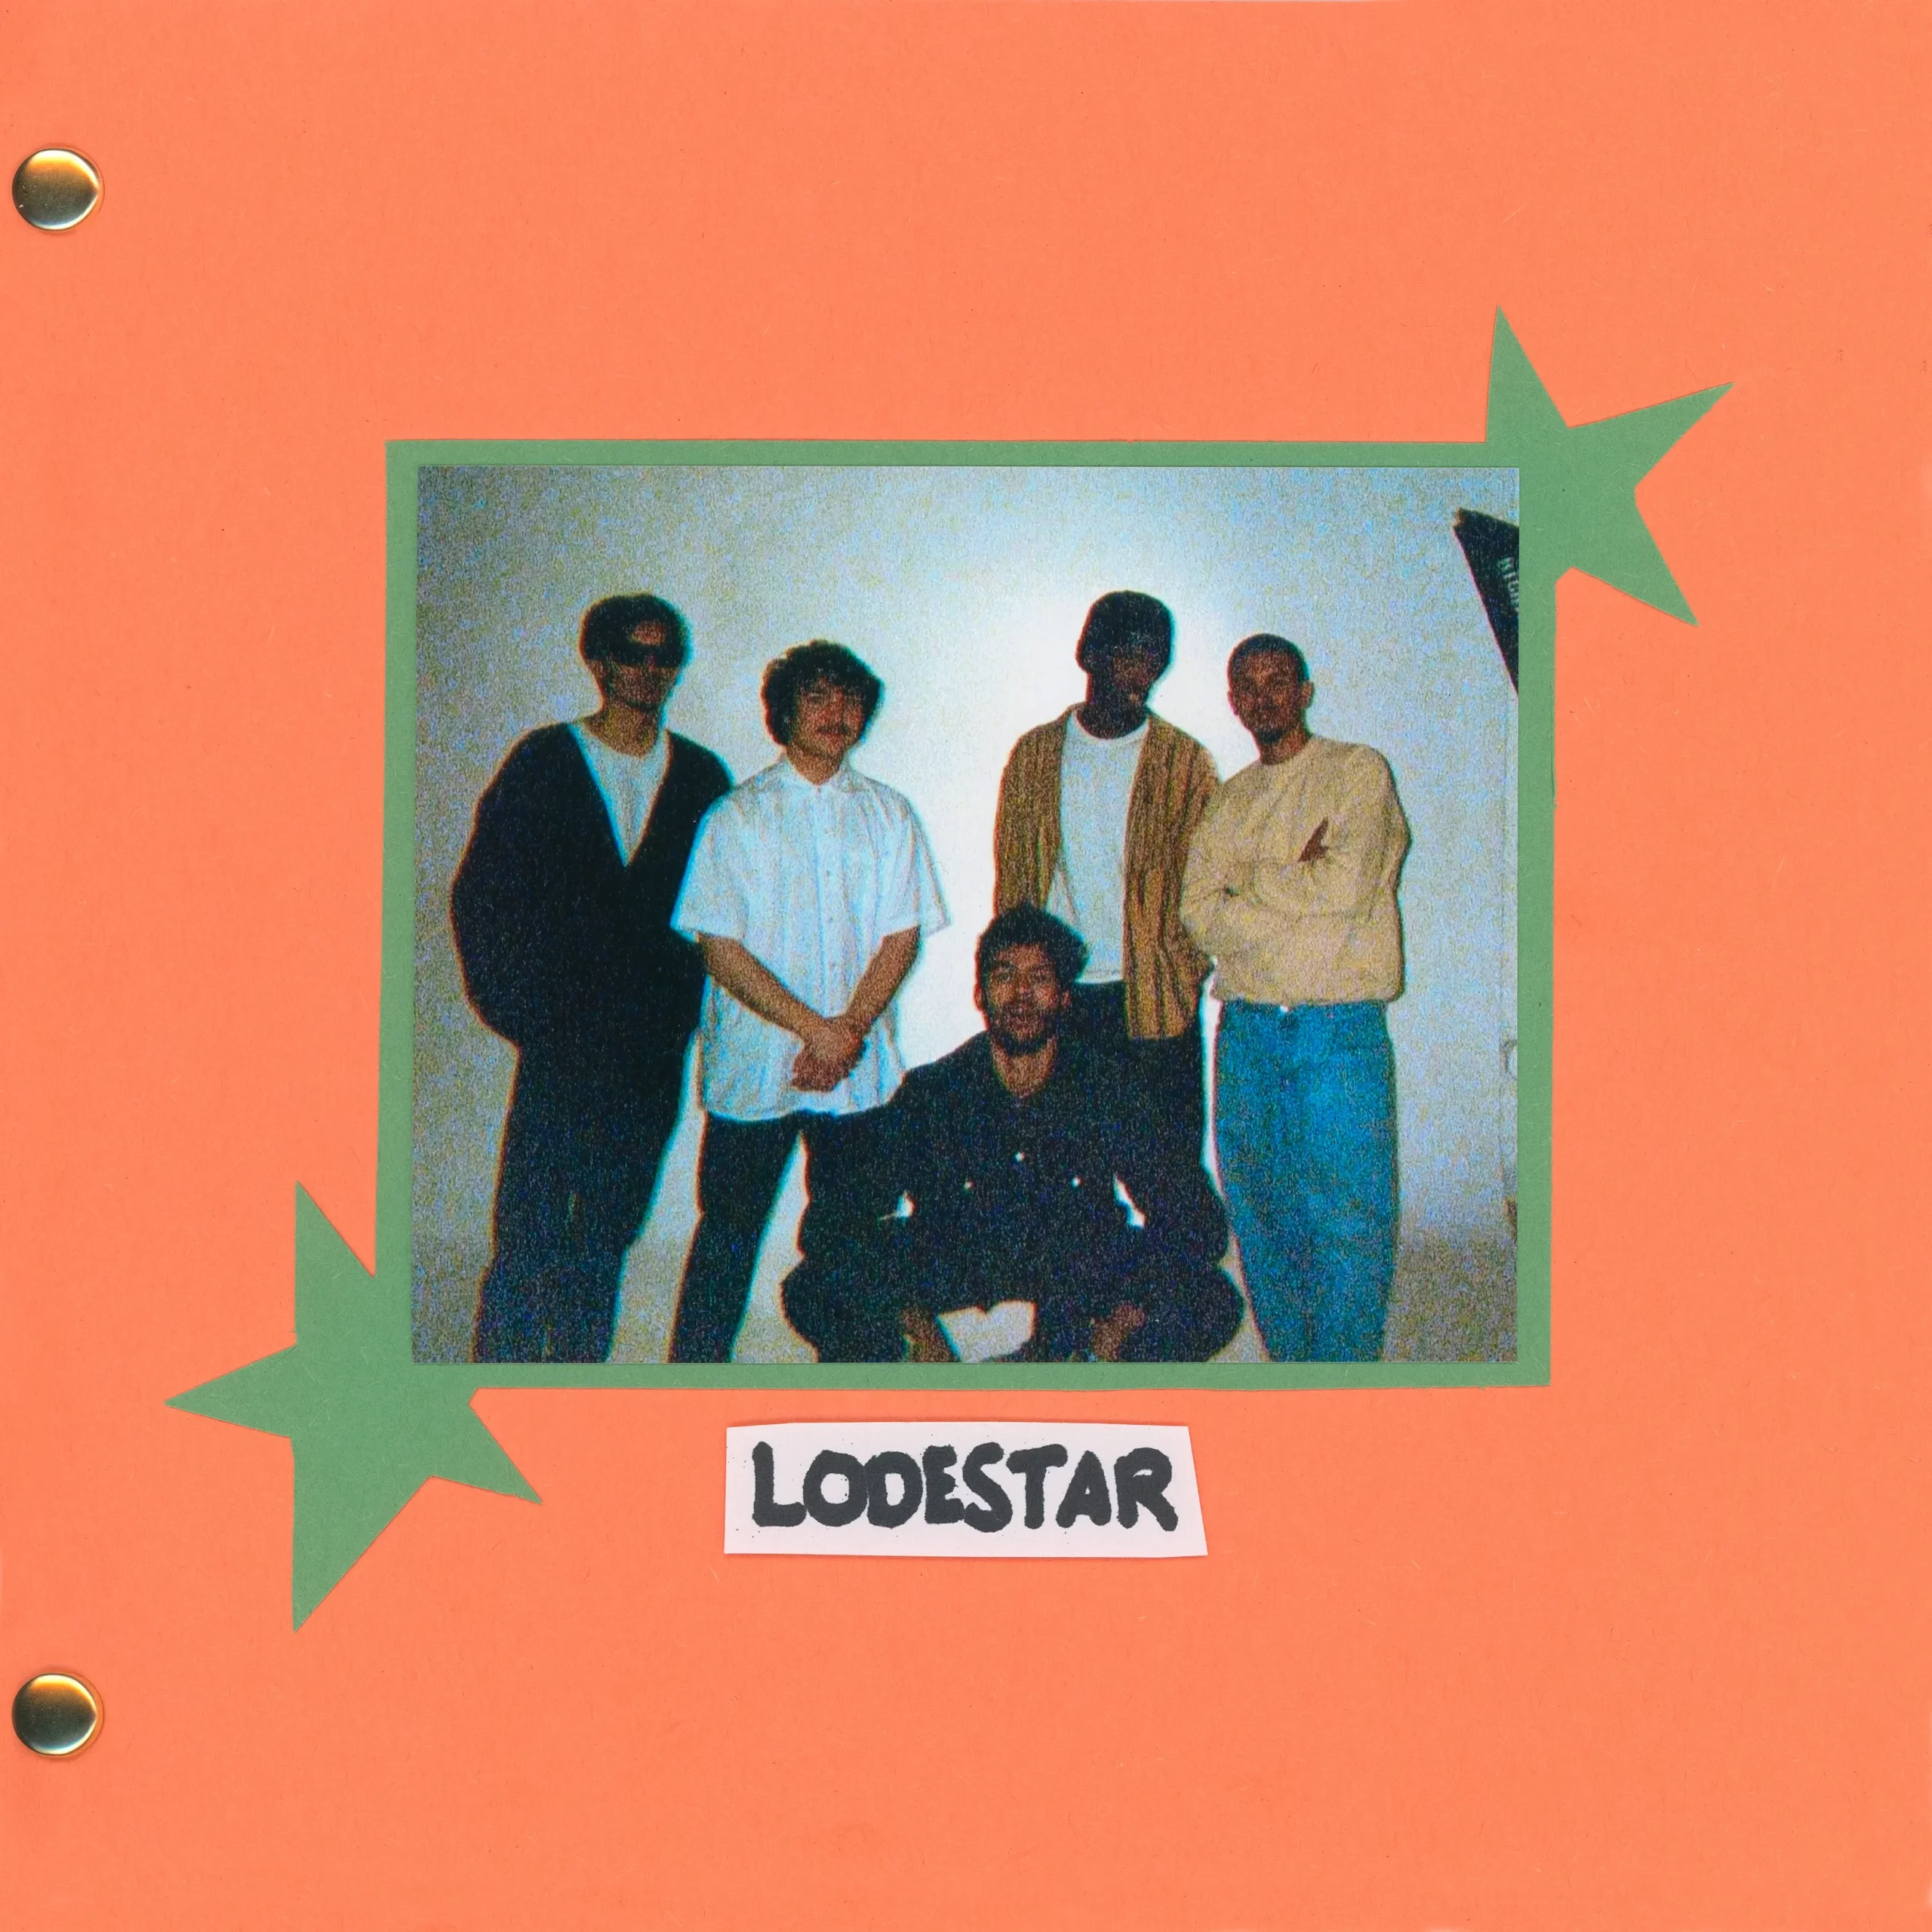 LODESTAR finds a group of young adults passionately eager for success in their music and personal lives, and each is aware of the unavoidable difficulty required to find that success.